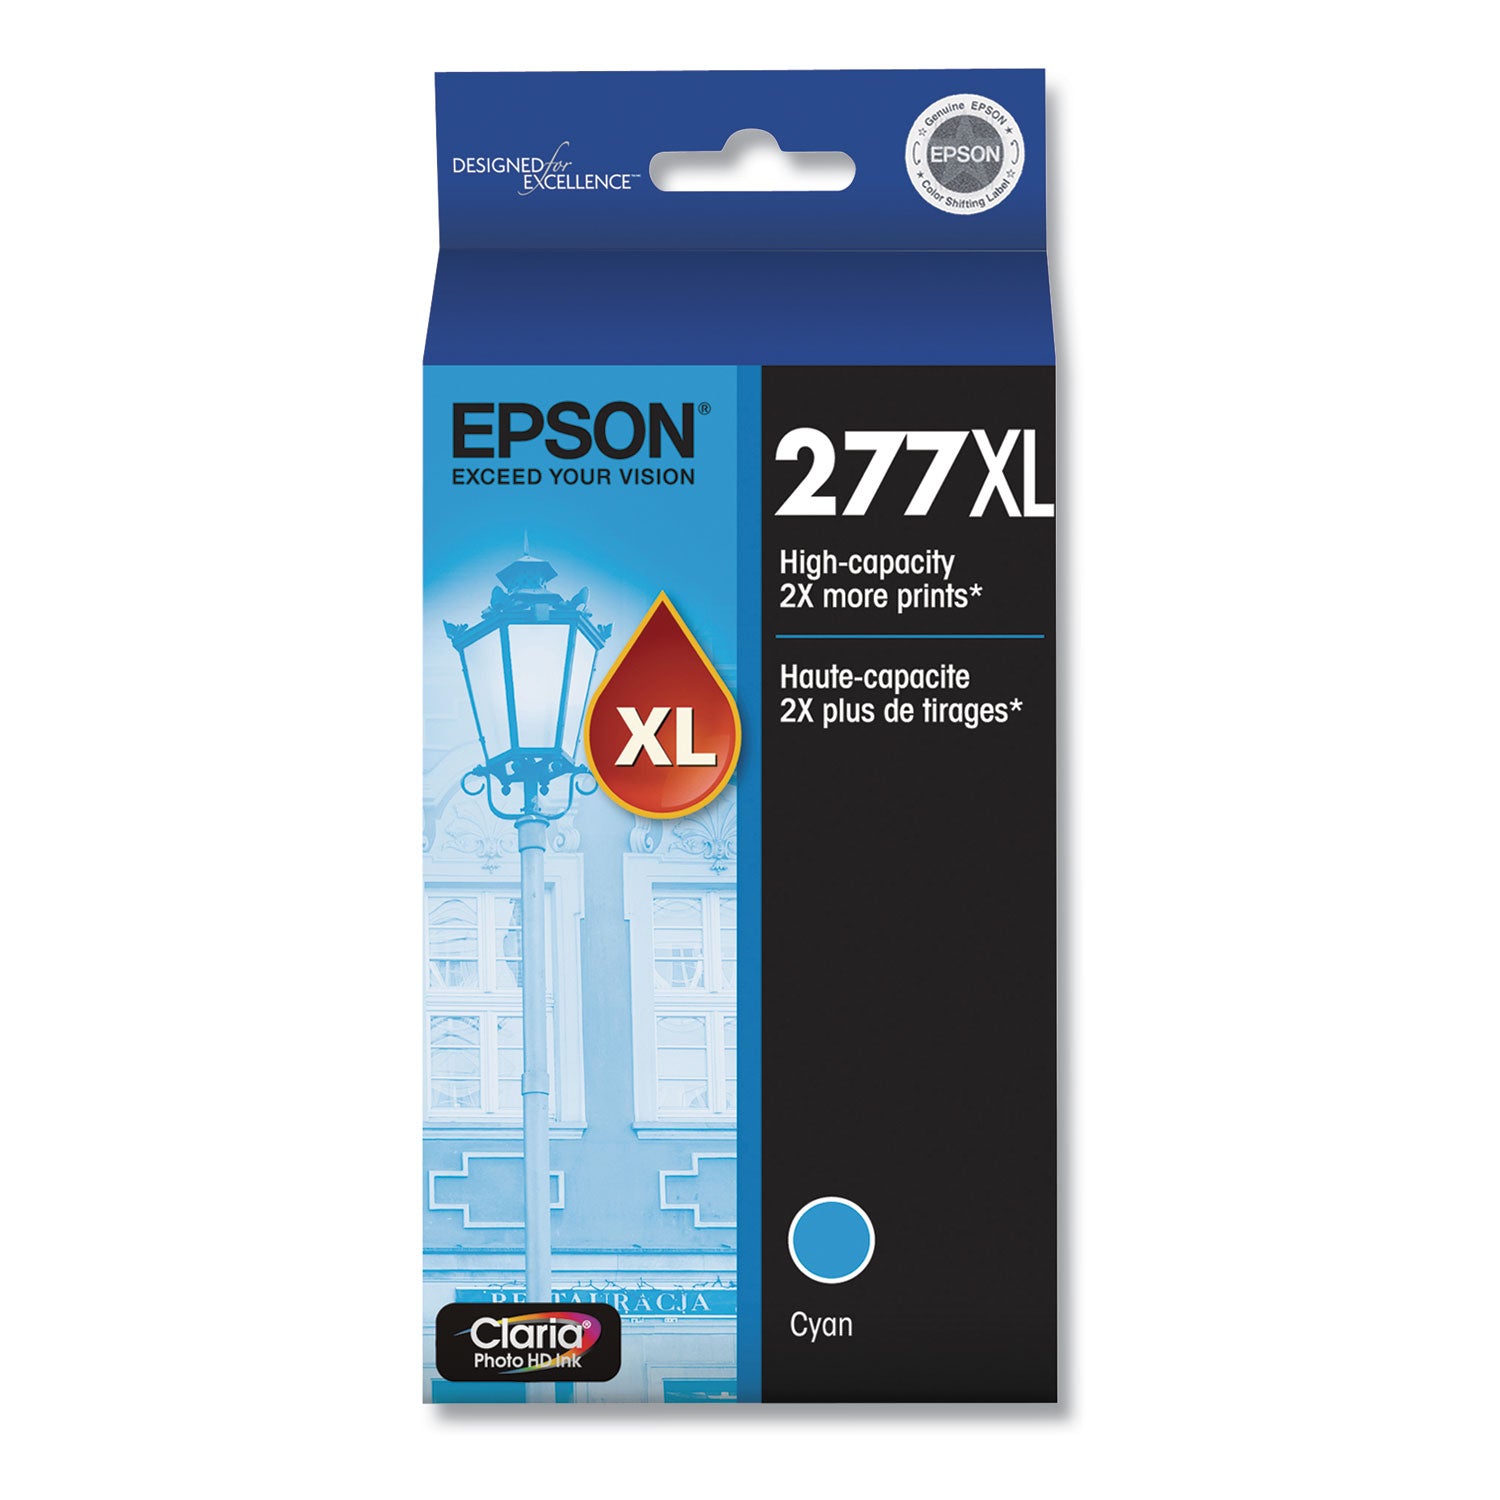 t277xl220-s-277xl-claria-high-yield-ink-740-page-yield-cyan_epst277xl220s - 1